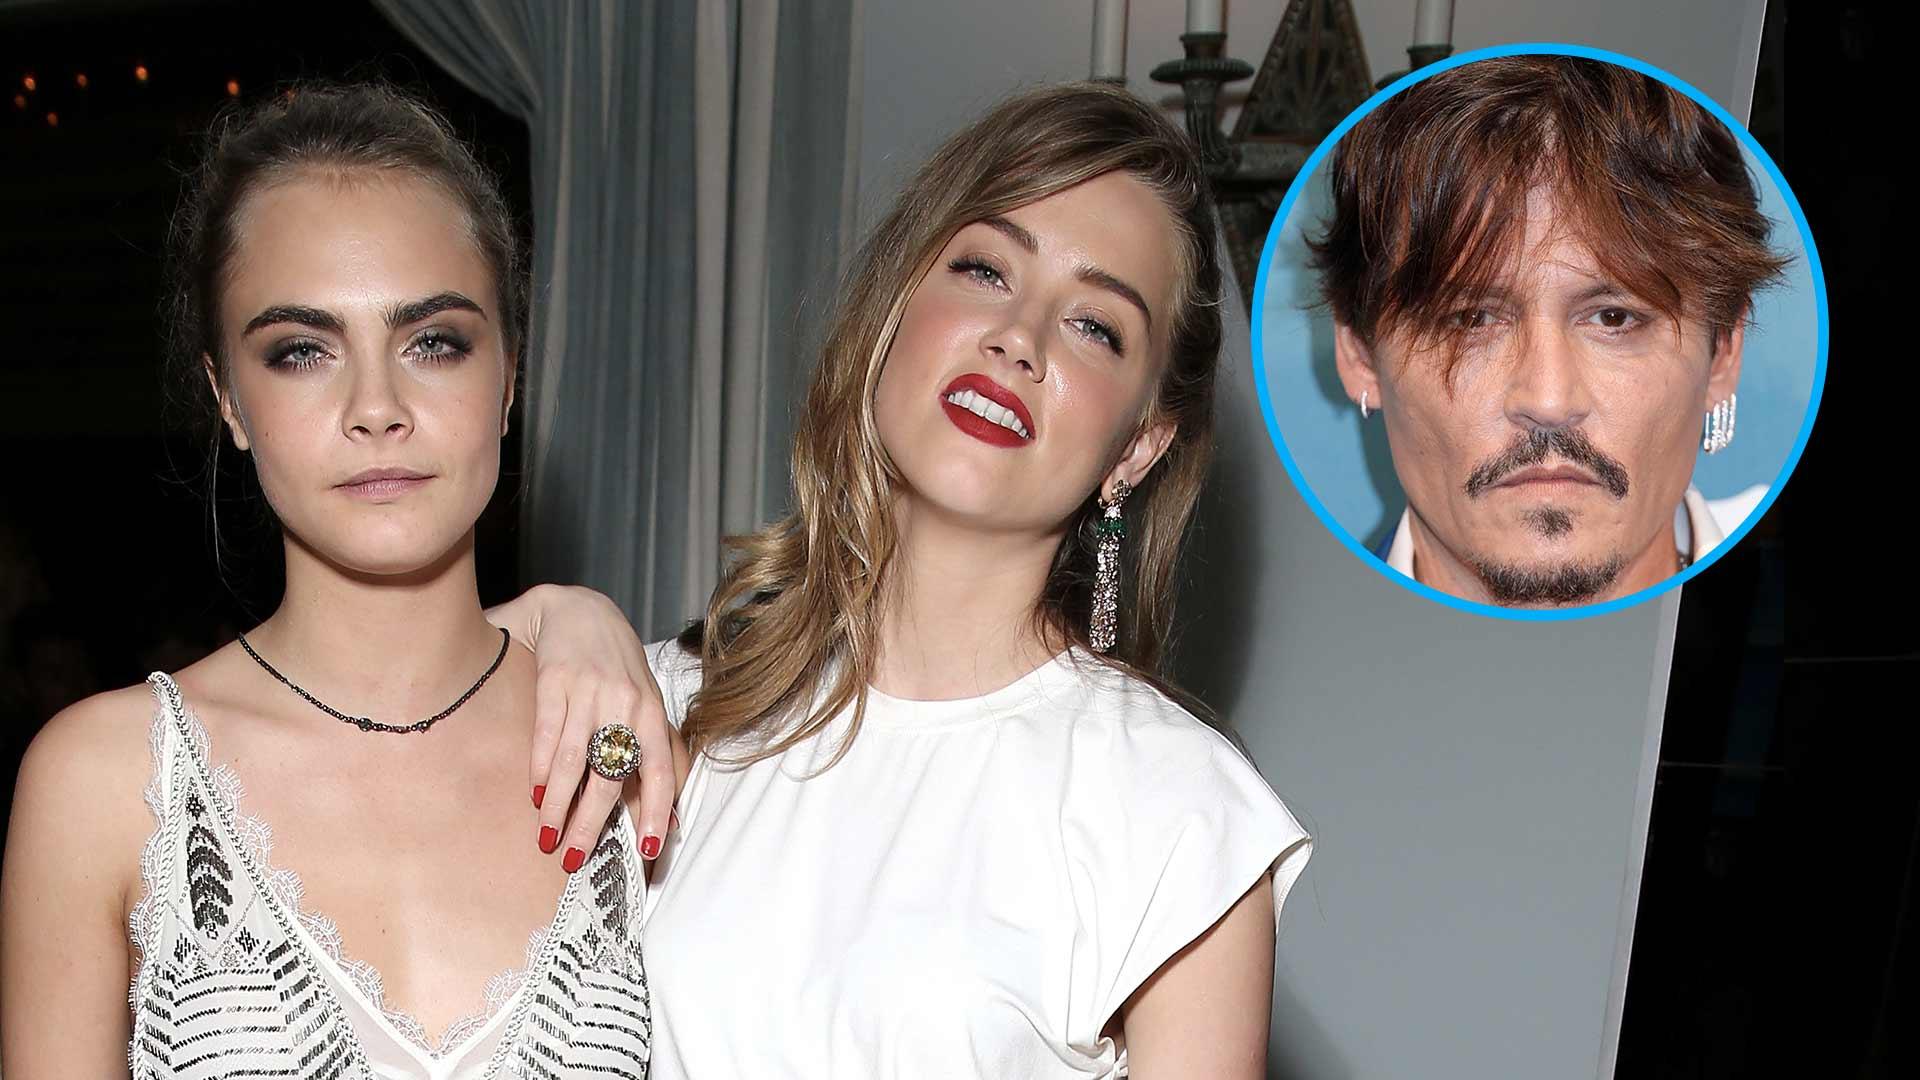 Deposition In Johnny Depp Case Alleges Amber Heard Had Threesome With Cara Delevingne & Elon Musk